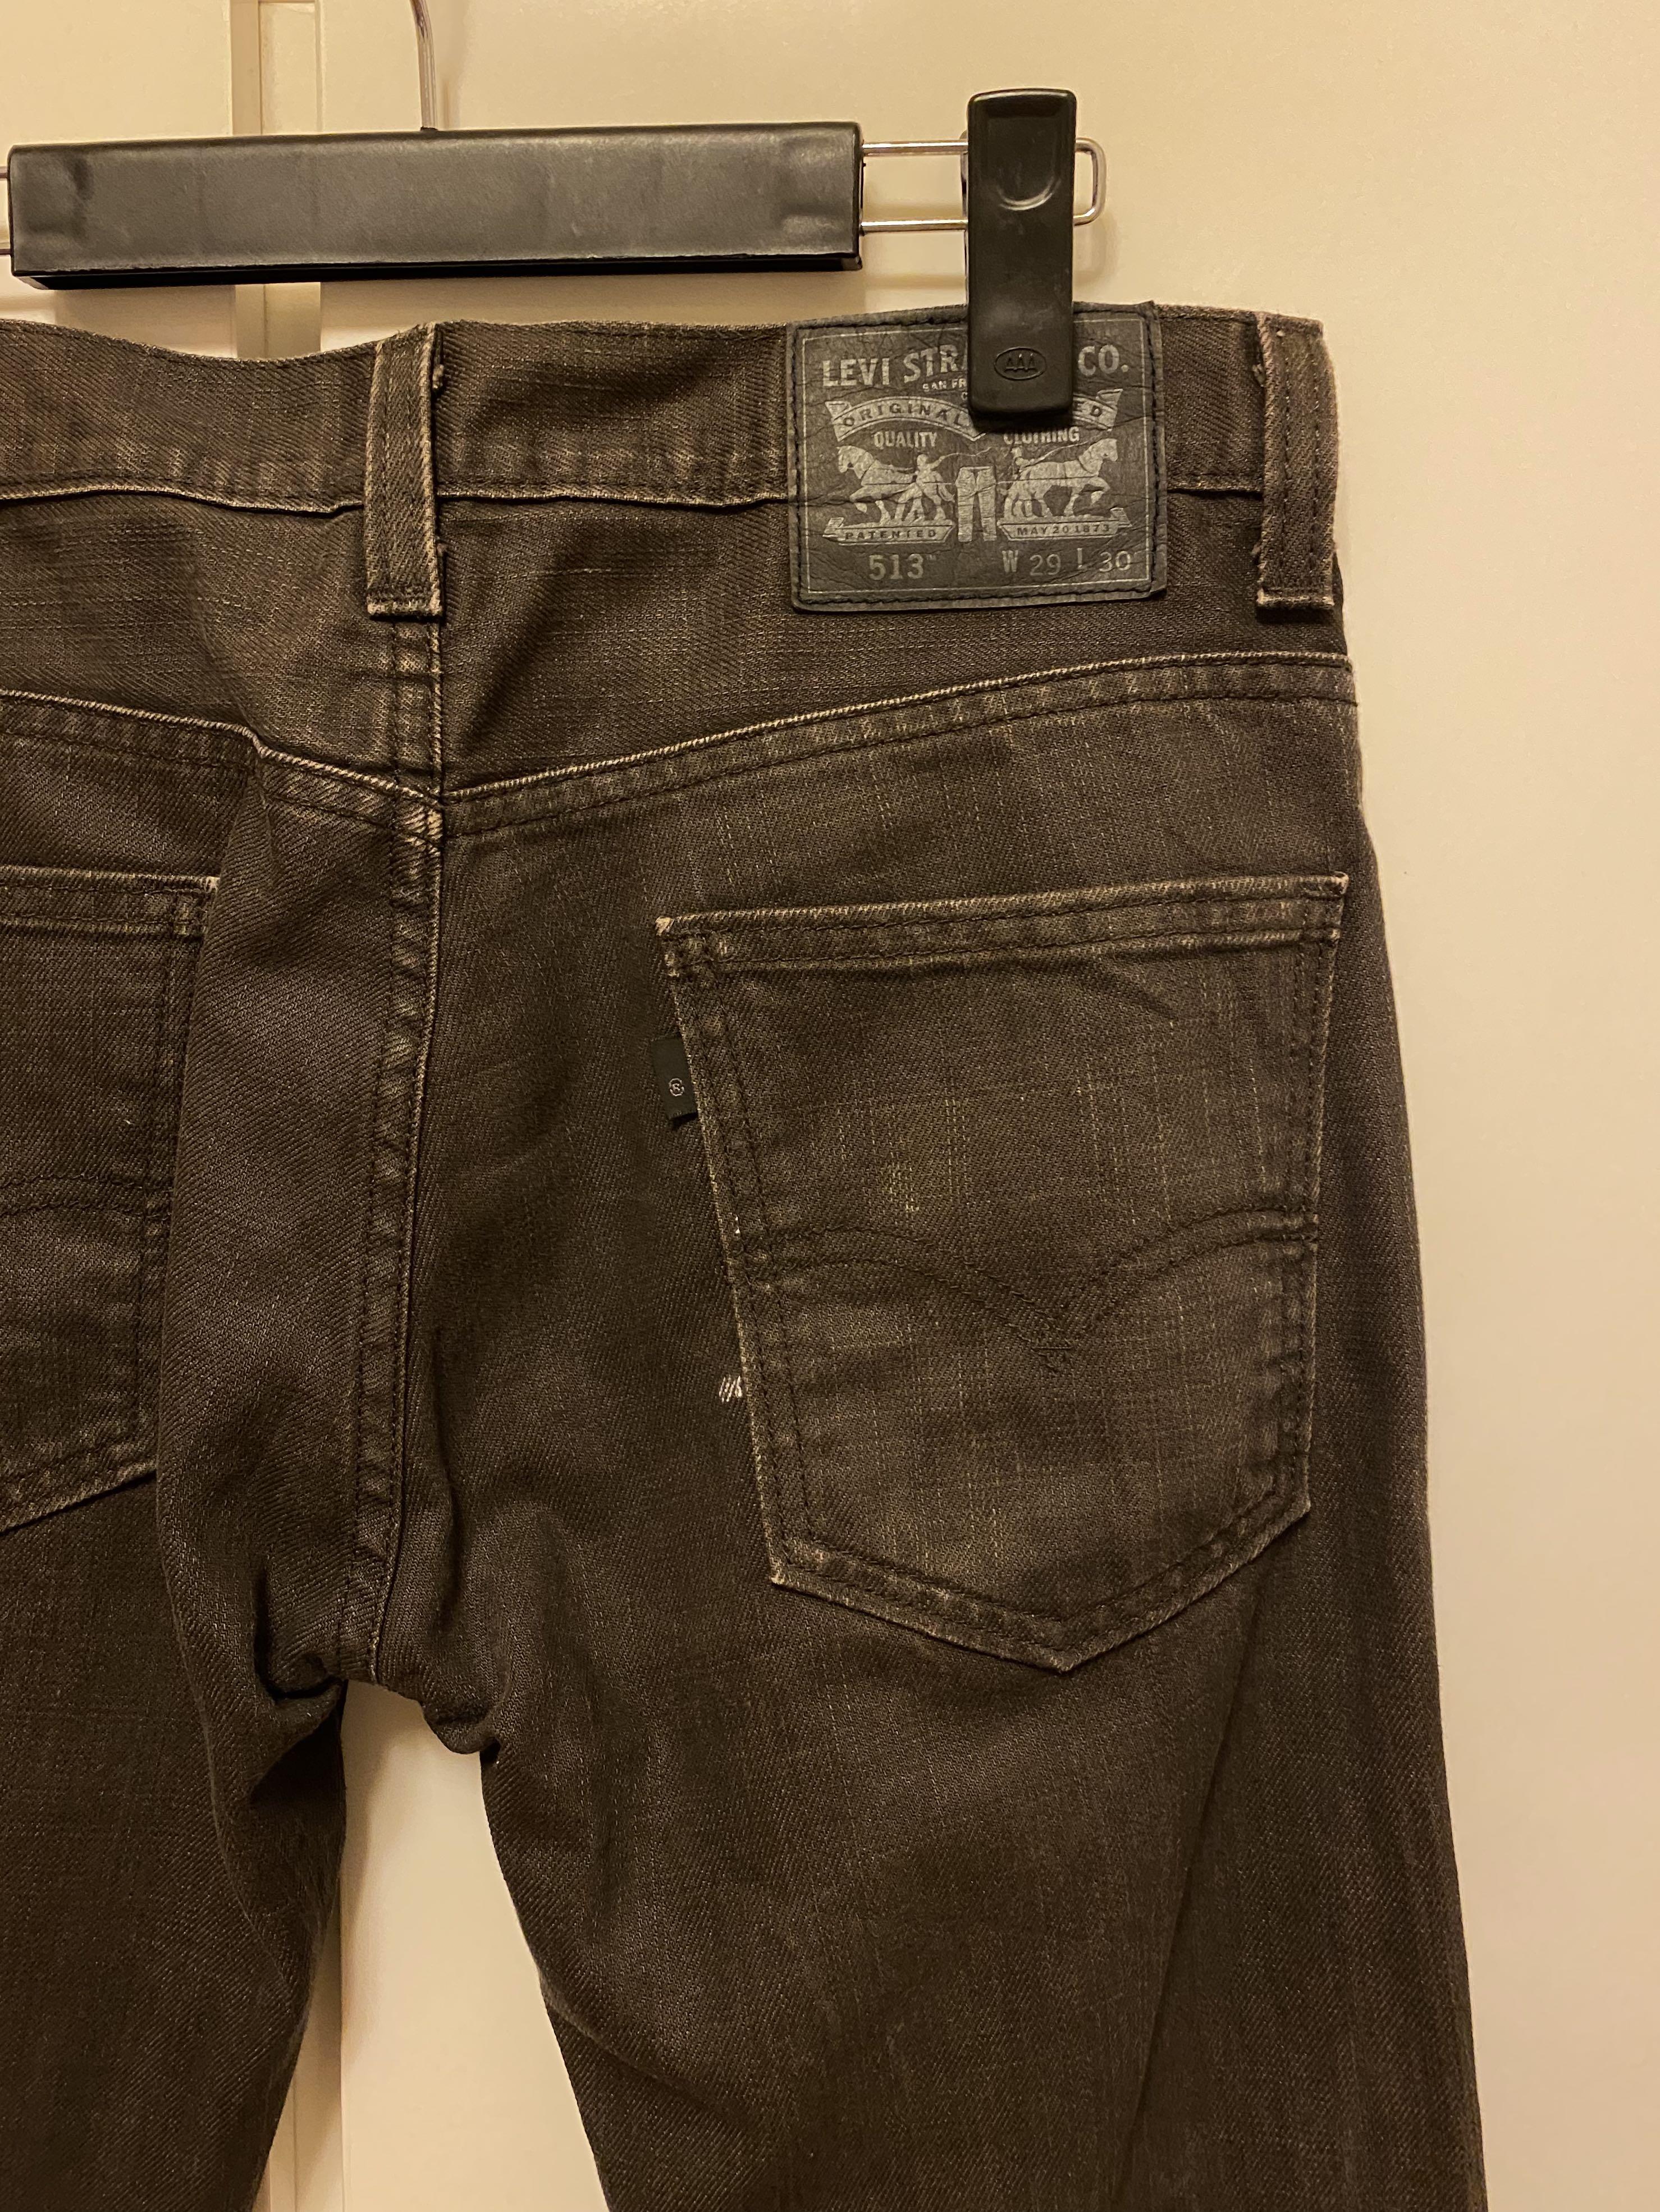 Vintage Levi's 513 Faded Dark Brown Jeans W29/L30, Men's Fashion, Bottoms,  Jeans on Carousell